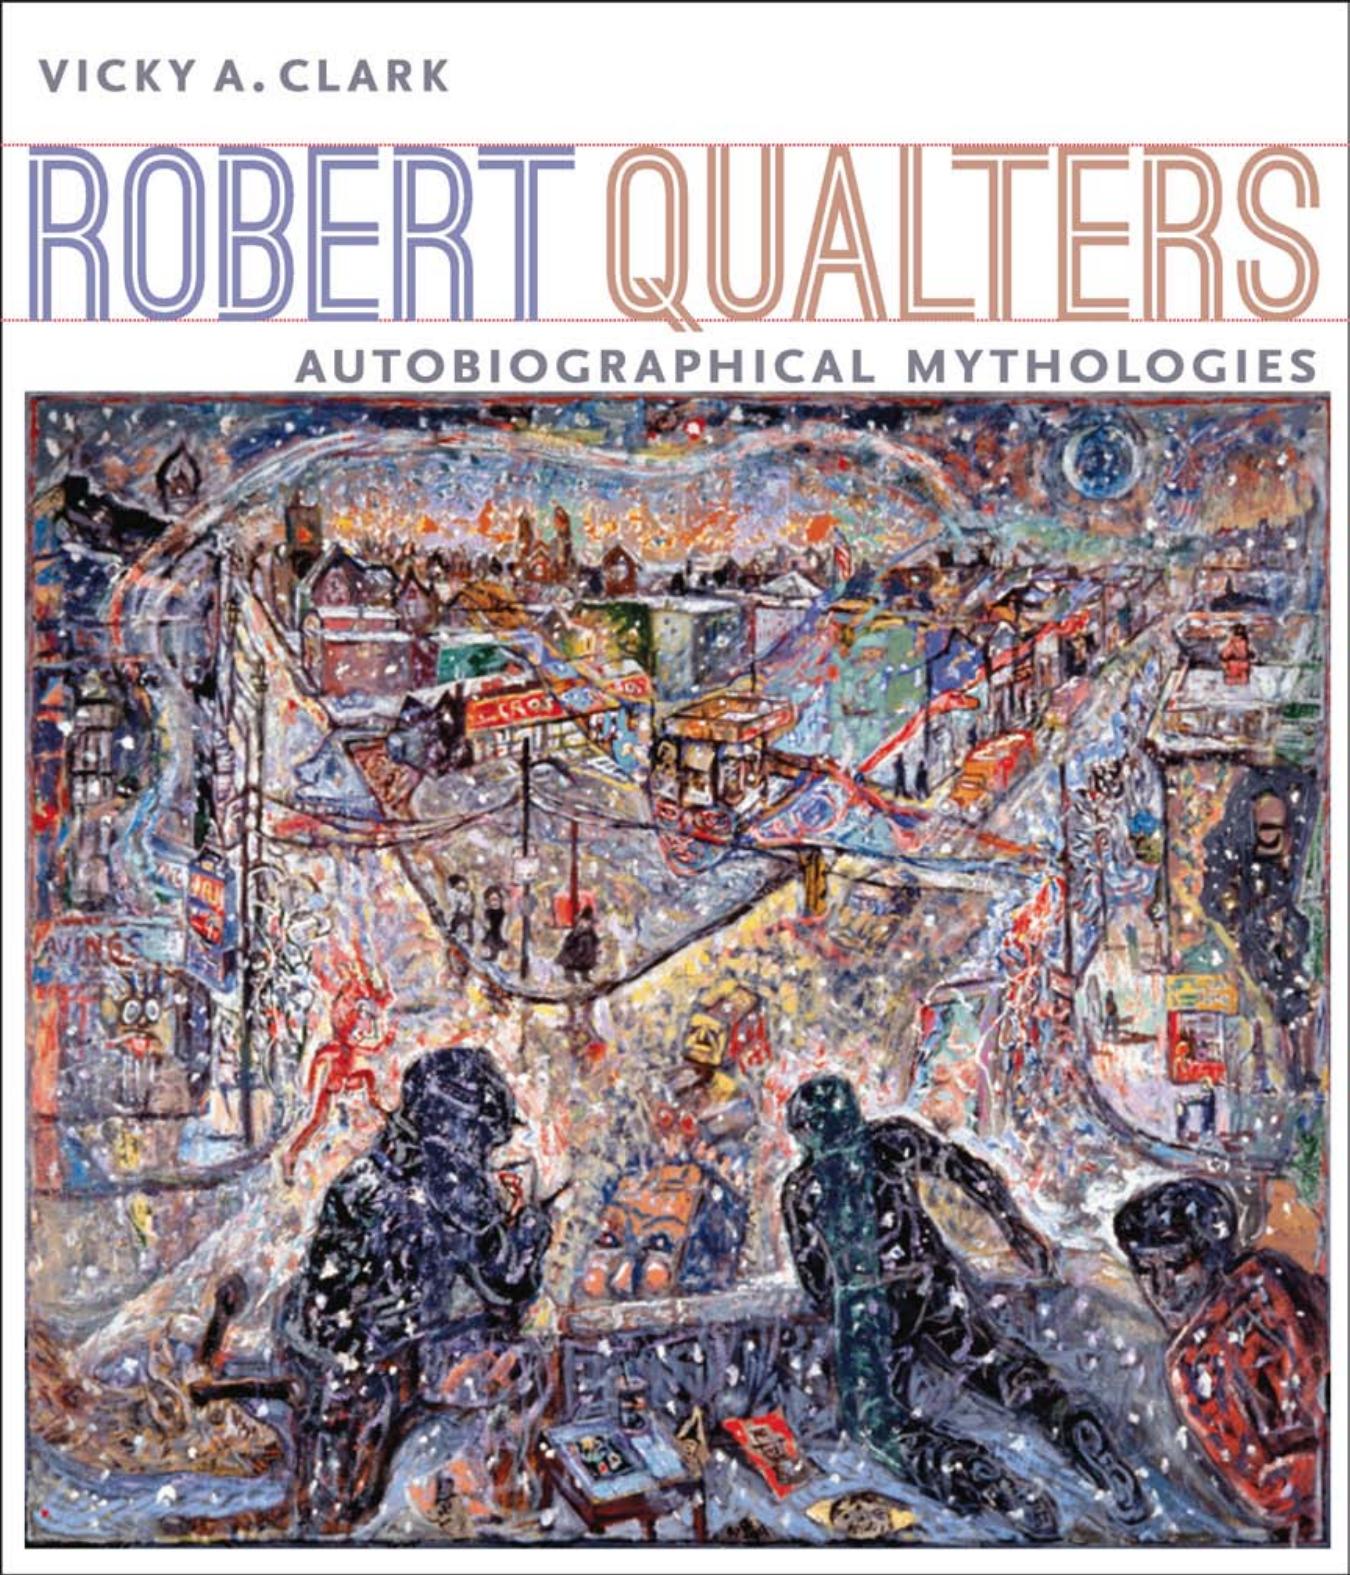 Robert Qualters : Autobiographical Mythologies by Vicky A. Clark